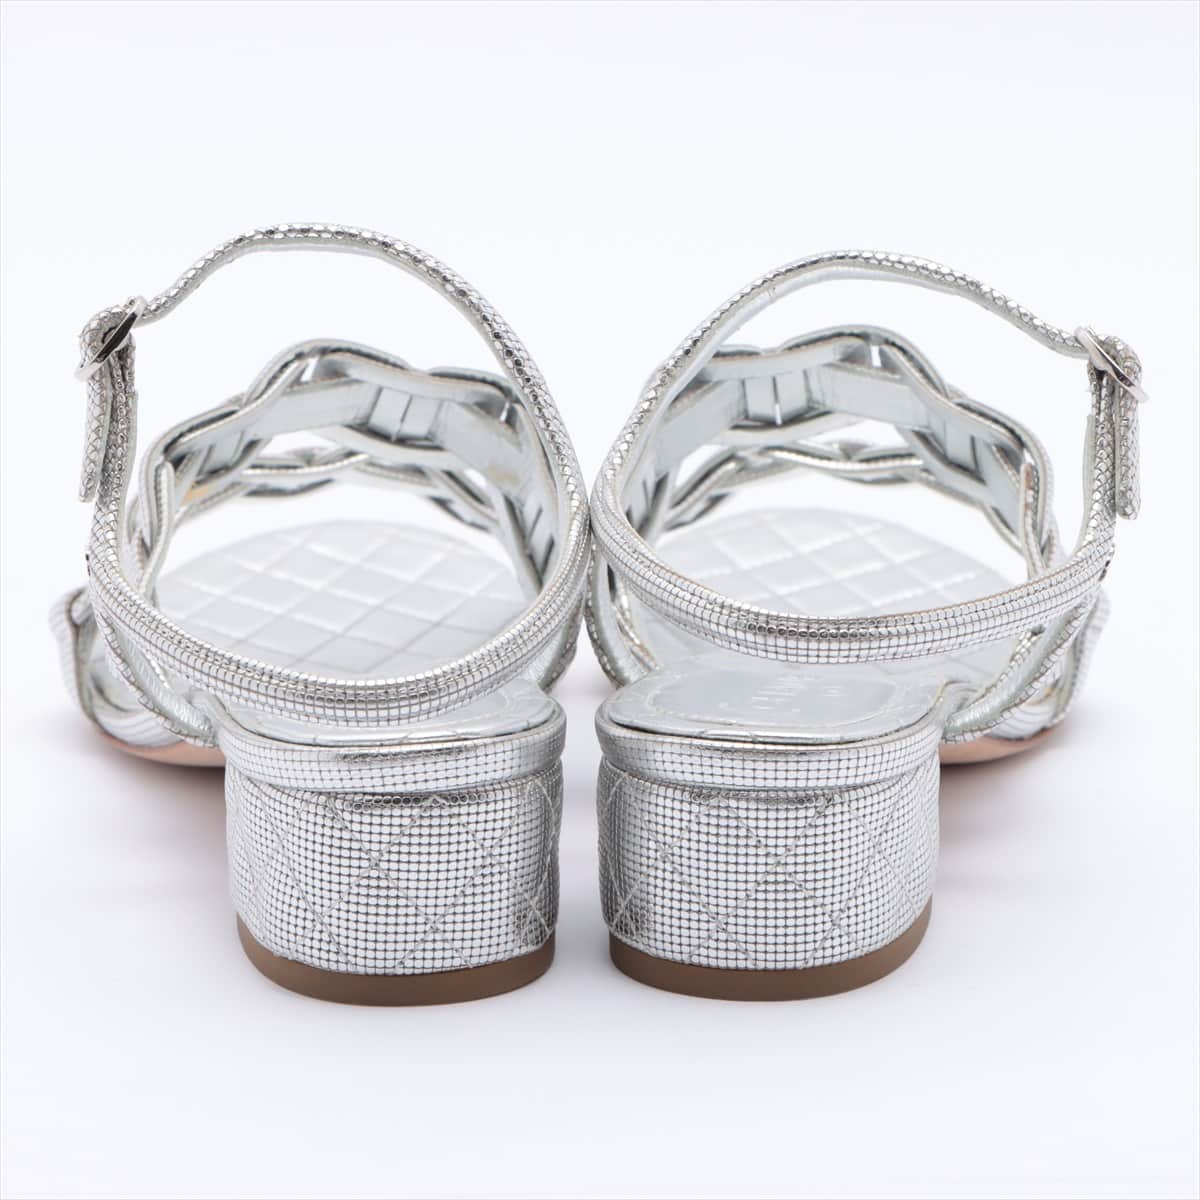 Chanel Coco Mark Metallic Leather Sandals 36.5 Ladies' Silver